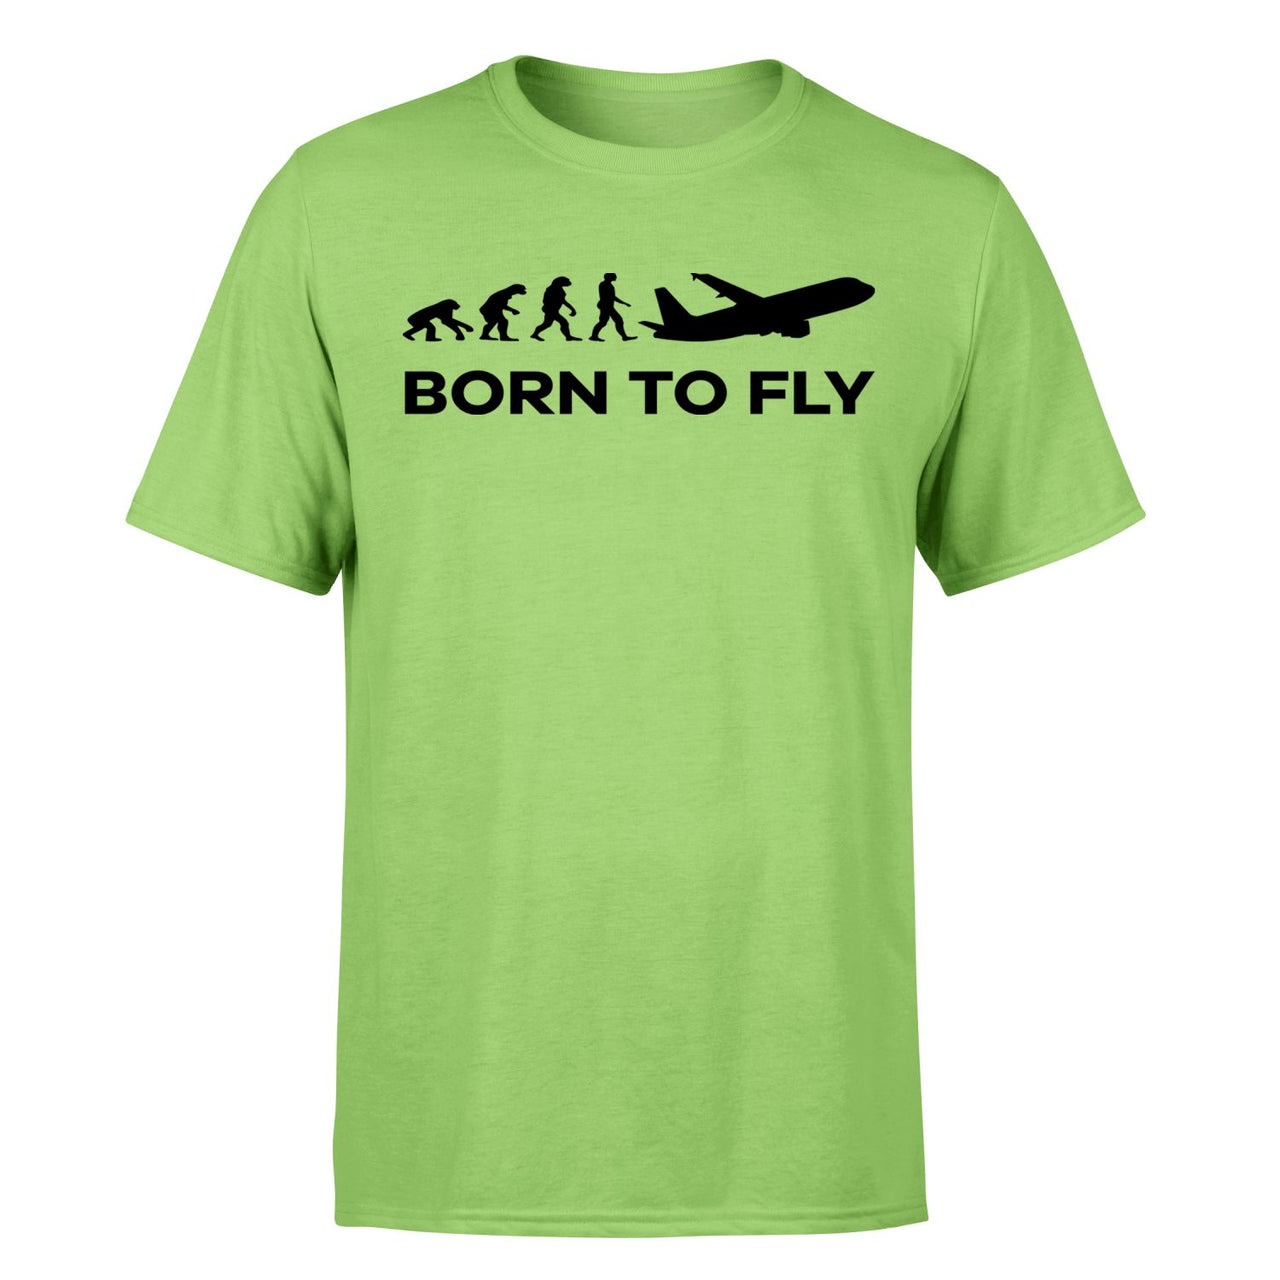 Born To Fly Designed T-Shirts